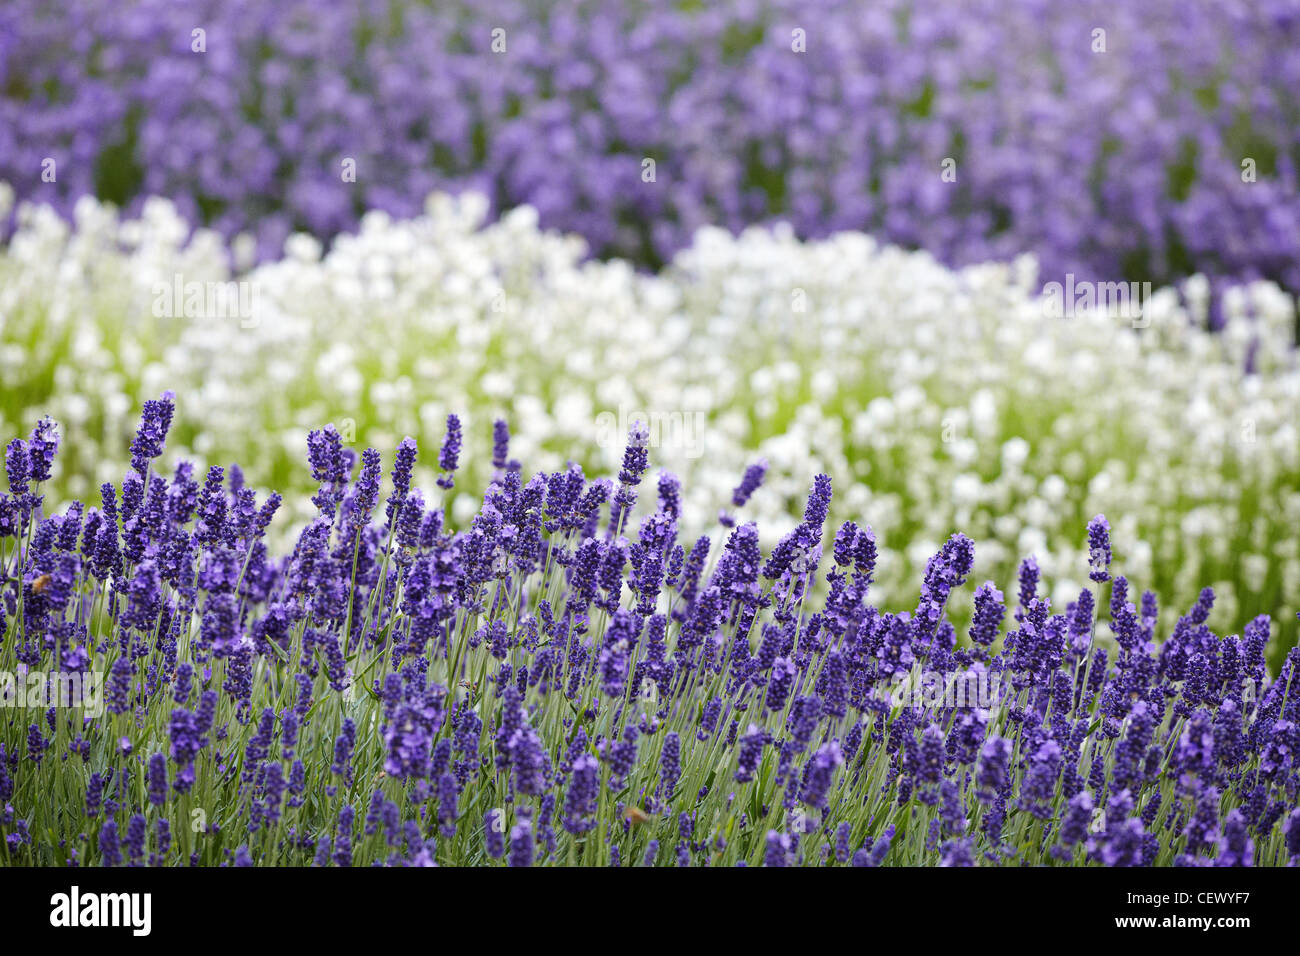 rows of white and purple lavender growing in a field at Snowshill Lavender Farm,  The Cotswolds, England, UK Stock Photo